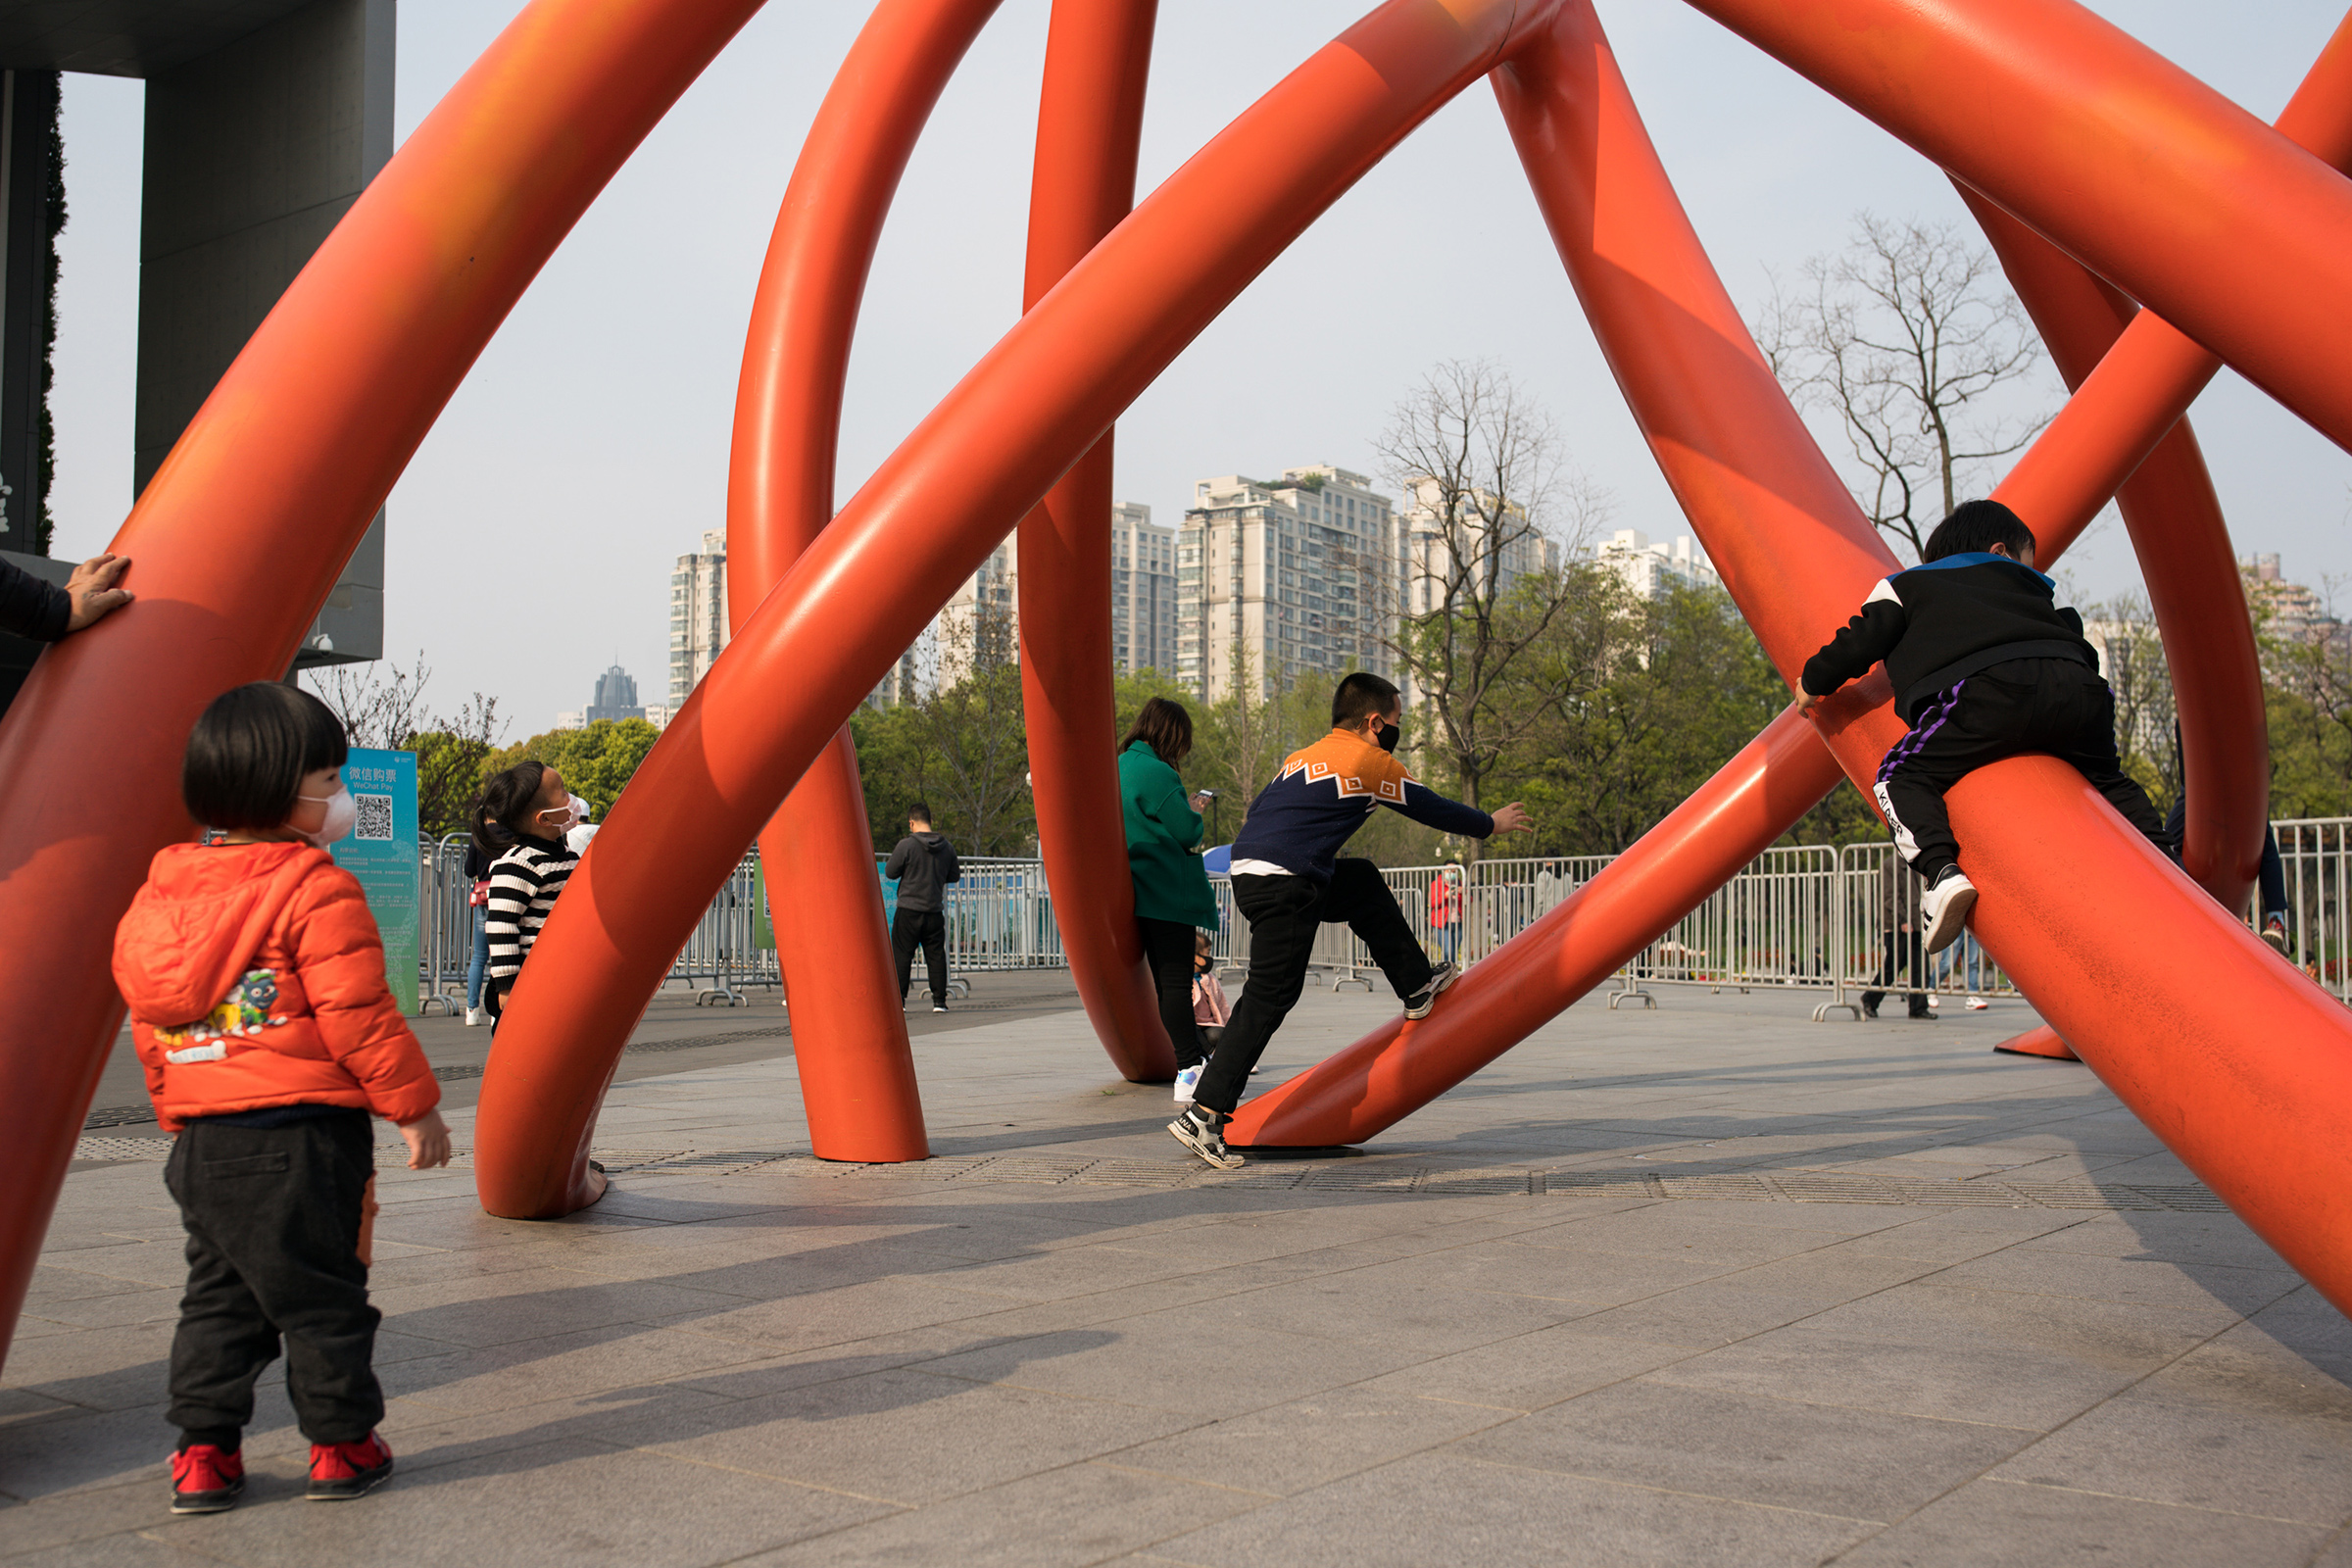 Children wear protective masks while playing under a sculpture in a city park on April 01, in Shanghai, China